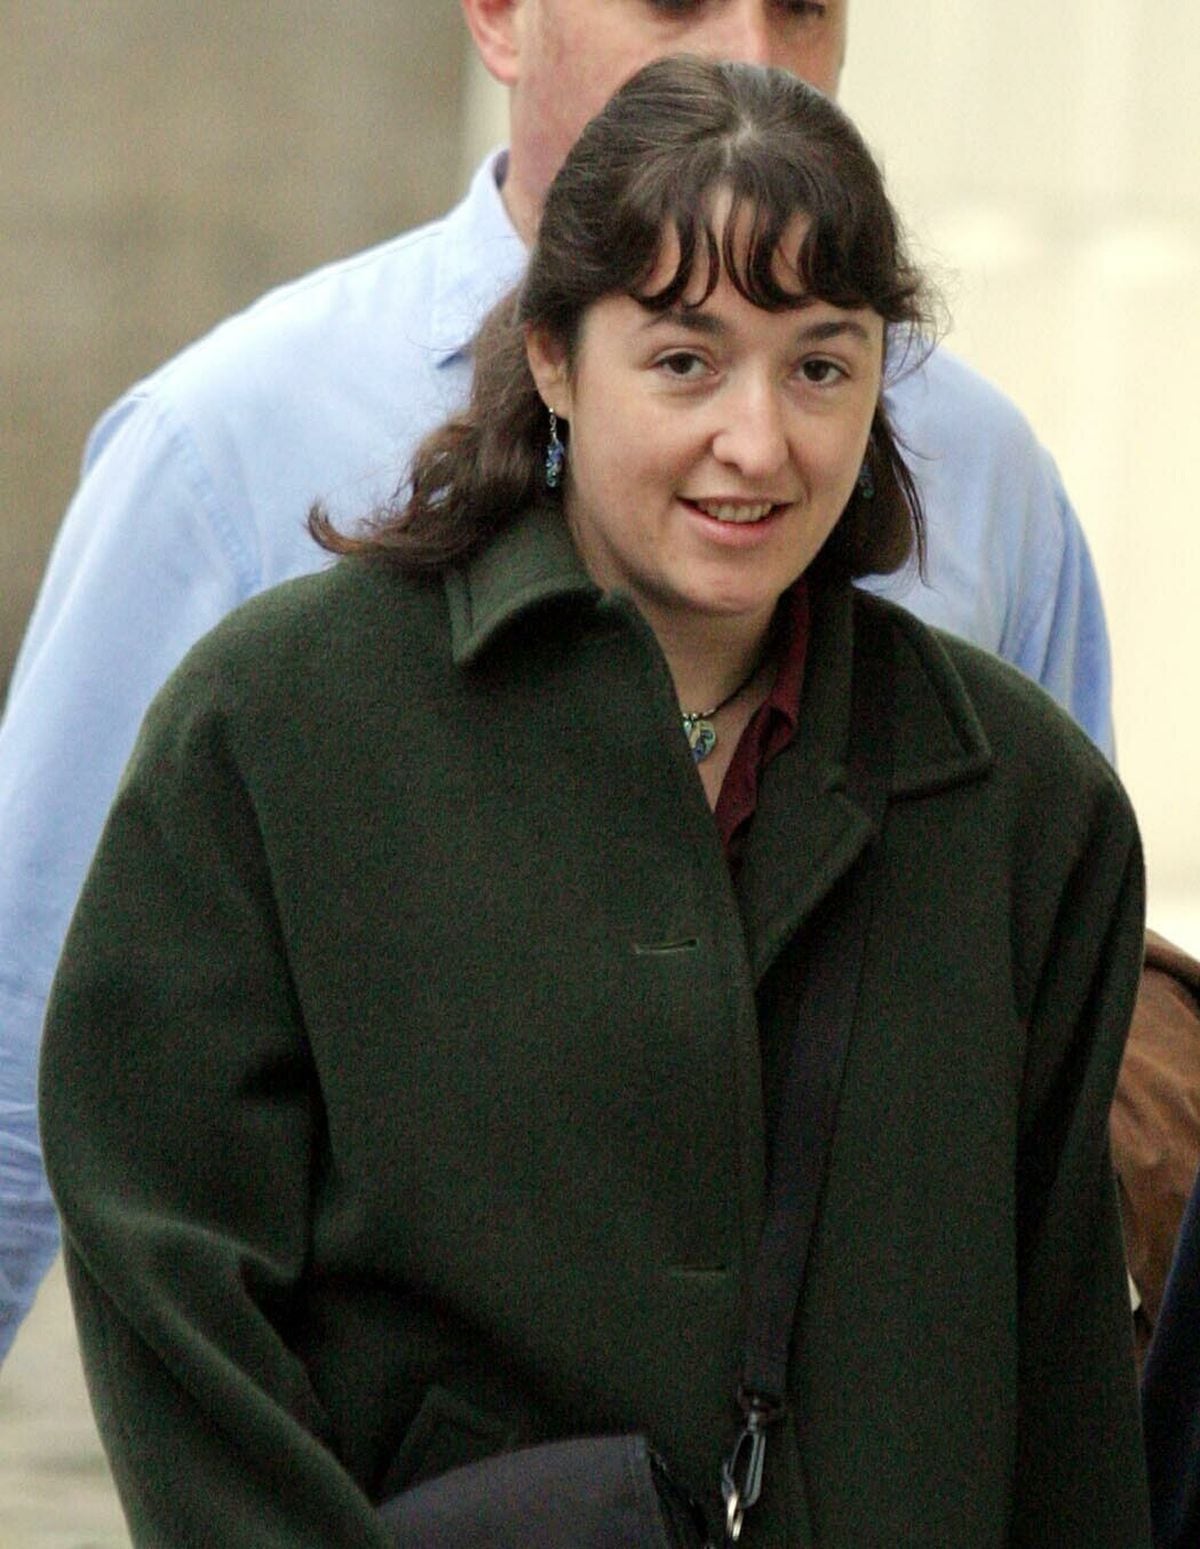 Victim Sarah Smith arriving at Hendy-Freegard's trial